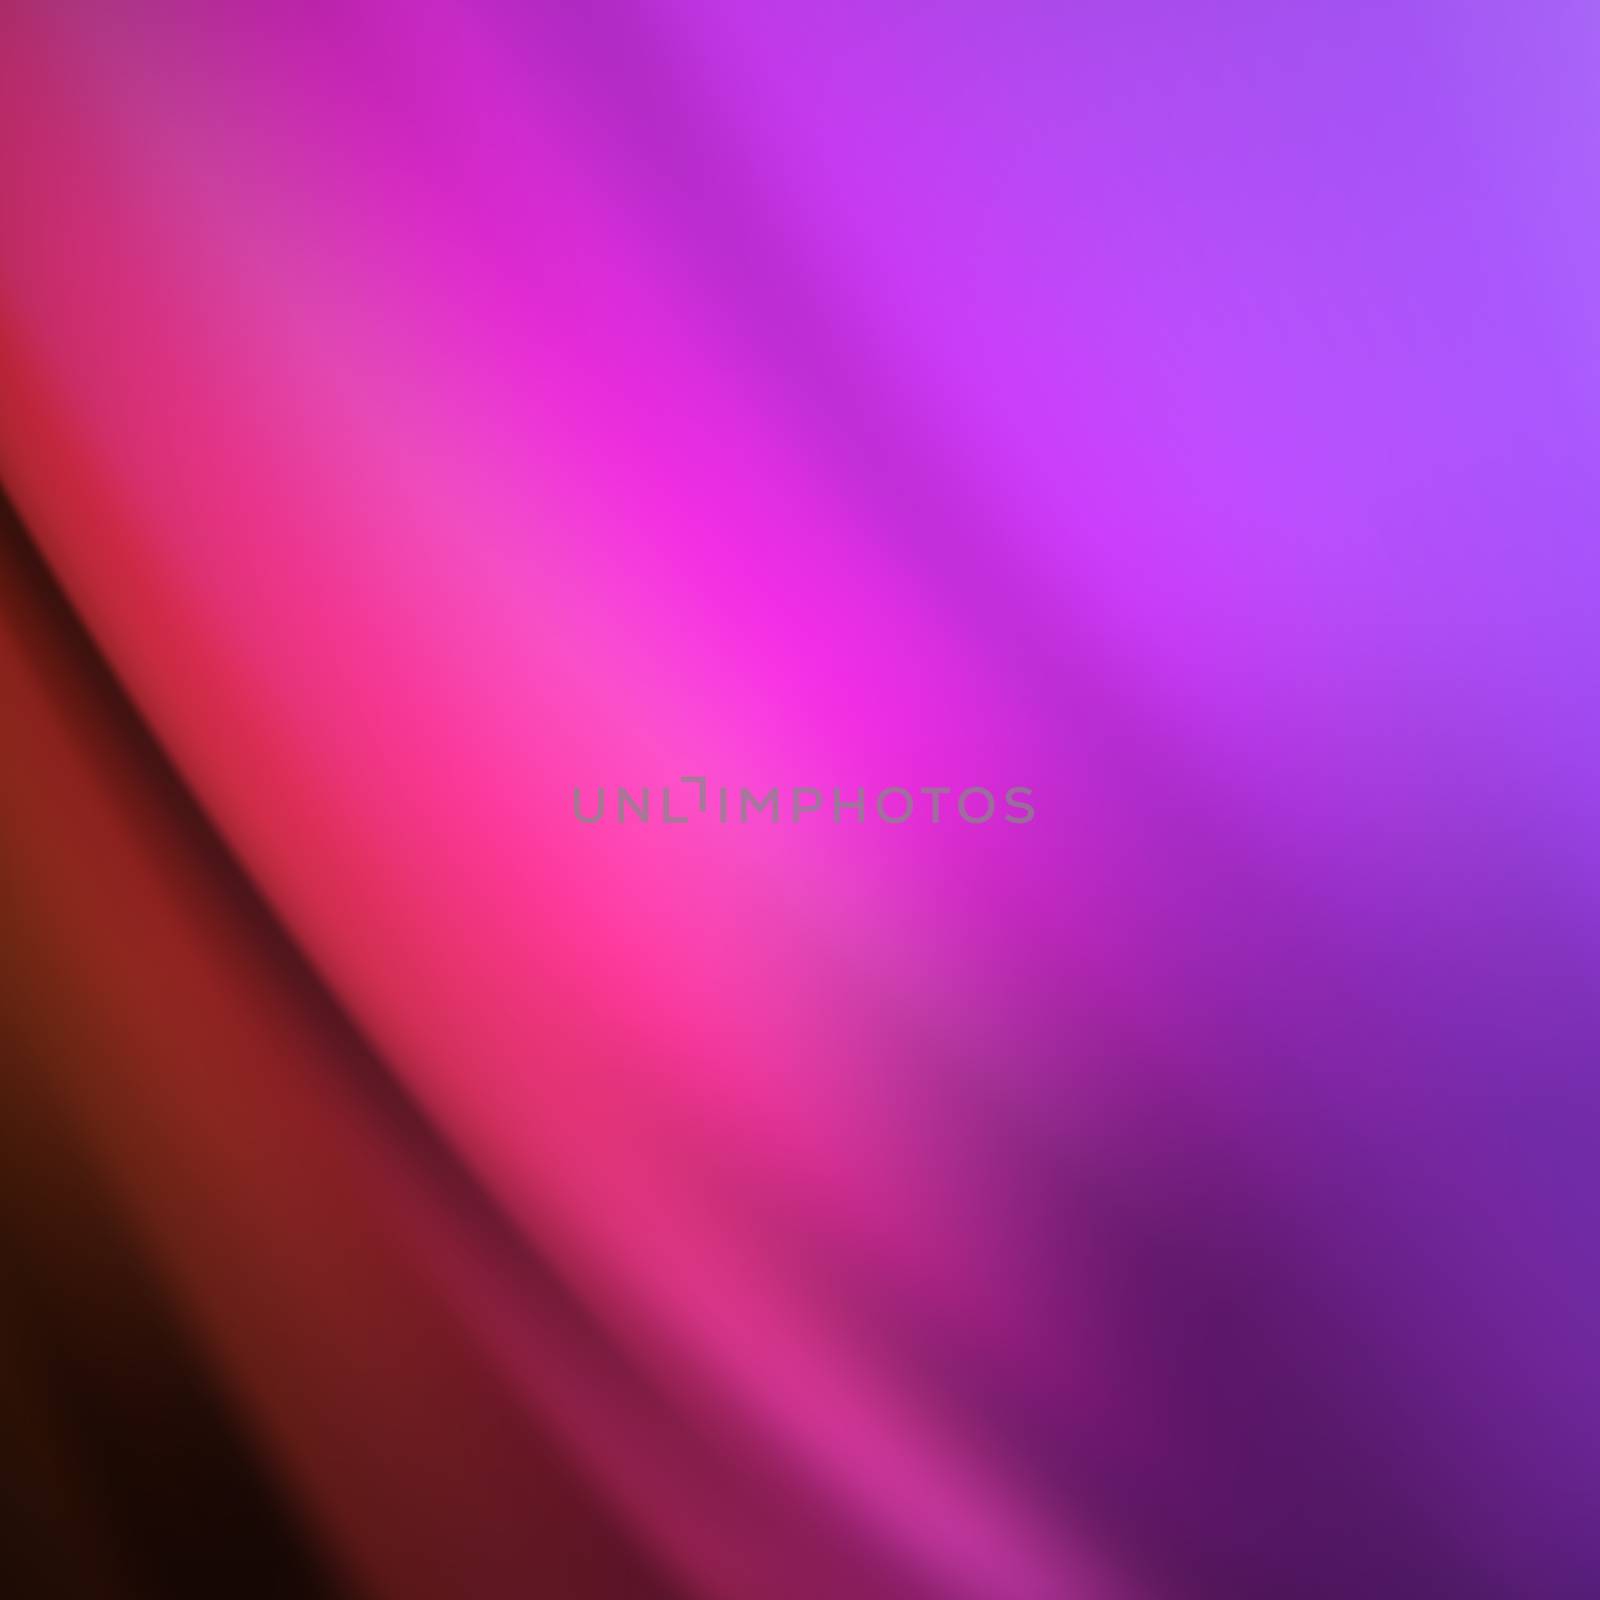 Pink Silk Fabric for Drapery Abstract Background